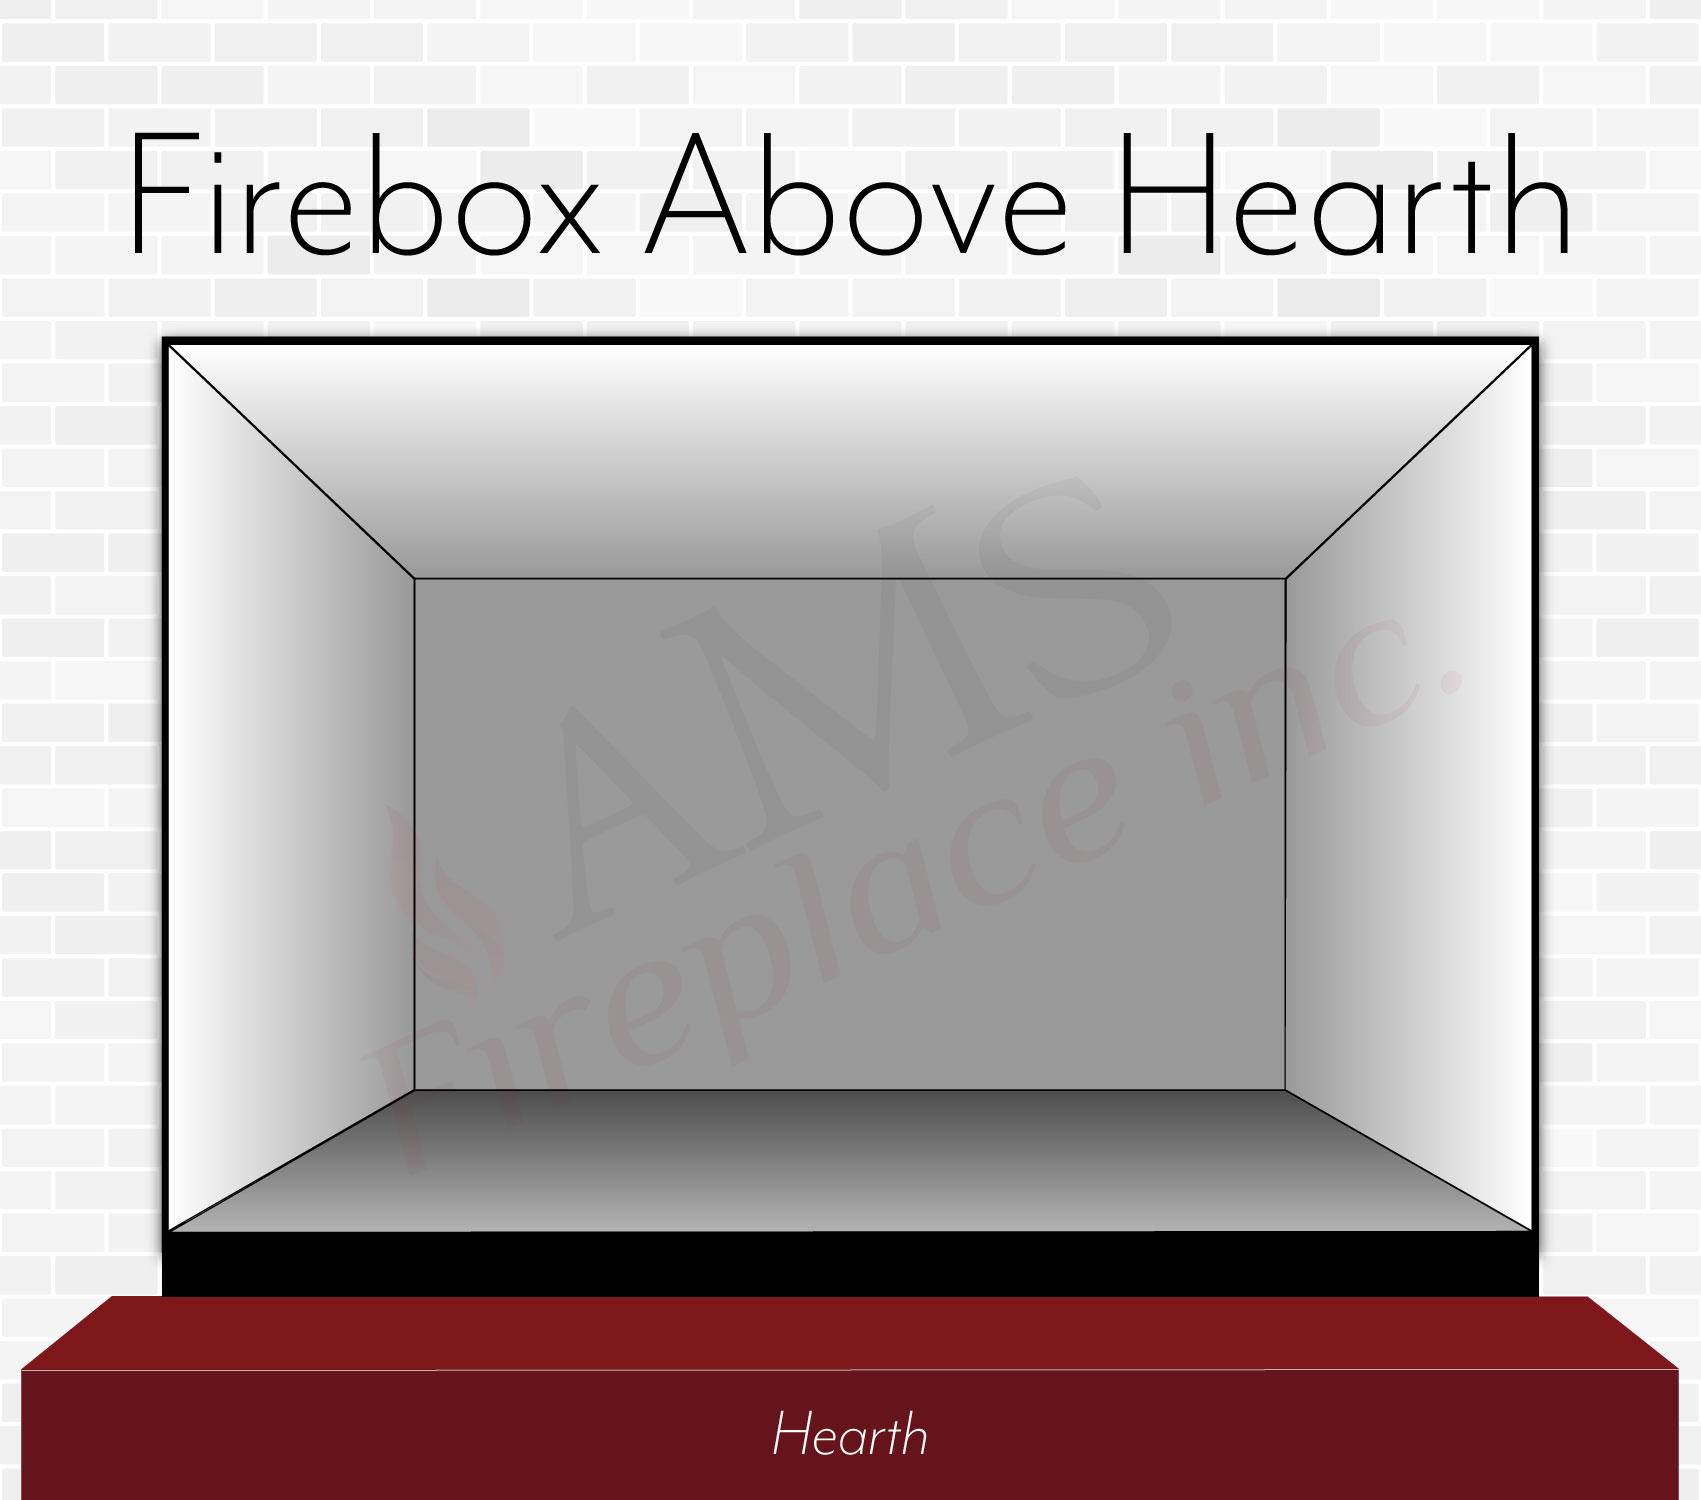 The Firebox is Above the Hearth